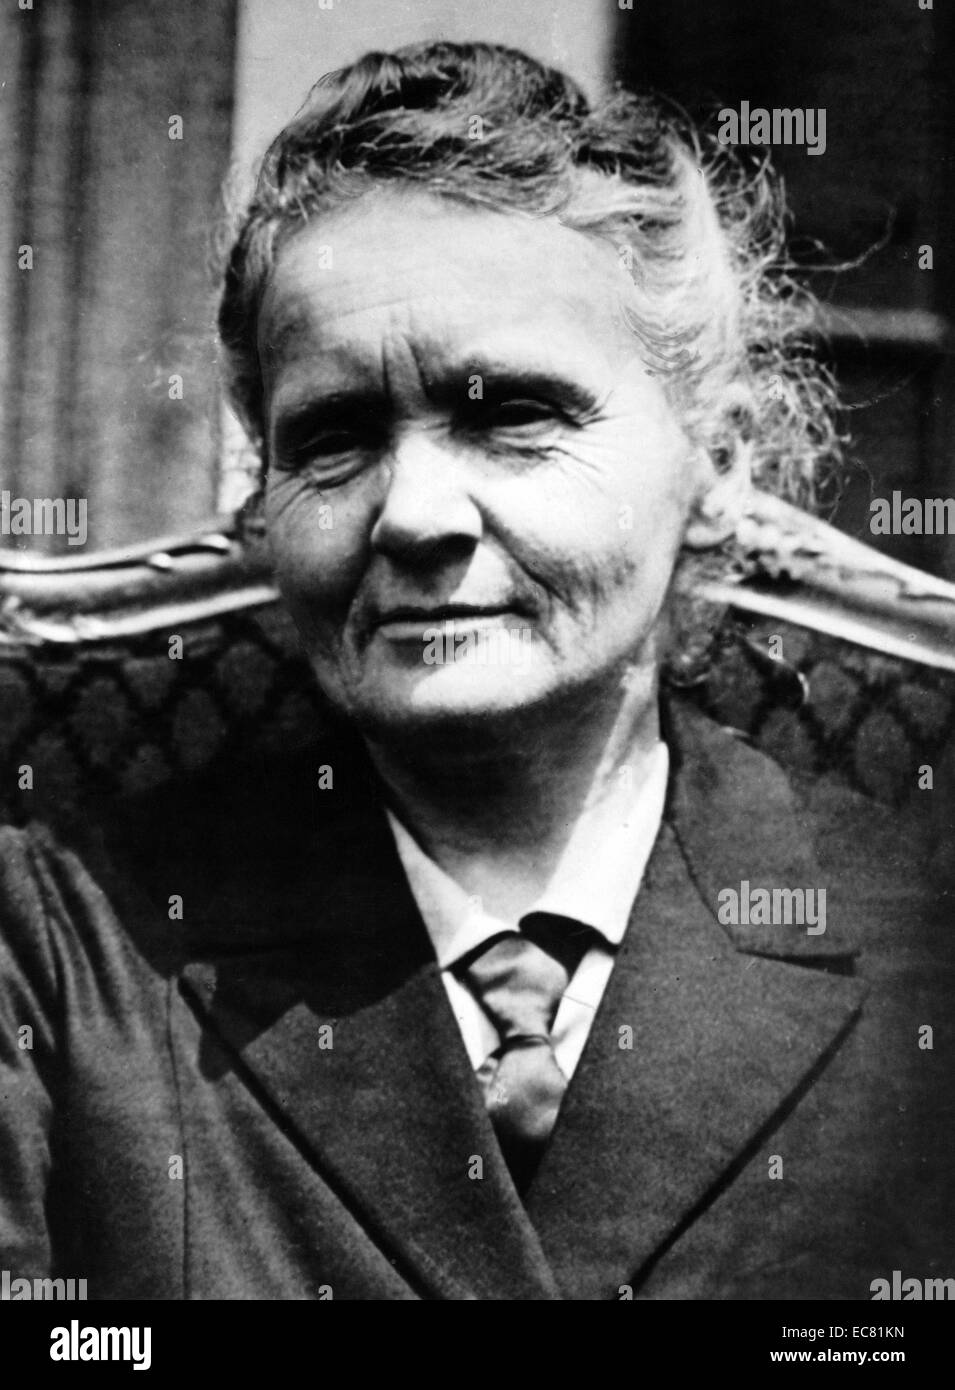 Photograph of Marie Sklodowska-Curie (1867-1934)  a Polish and naturalized-French physicist, Nobel Prize winner and chemist who conducted pioneering research on radioactivity. Dated 1930 Stock Photo